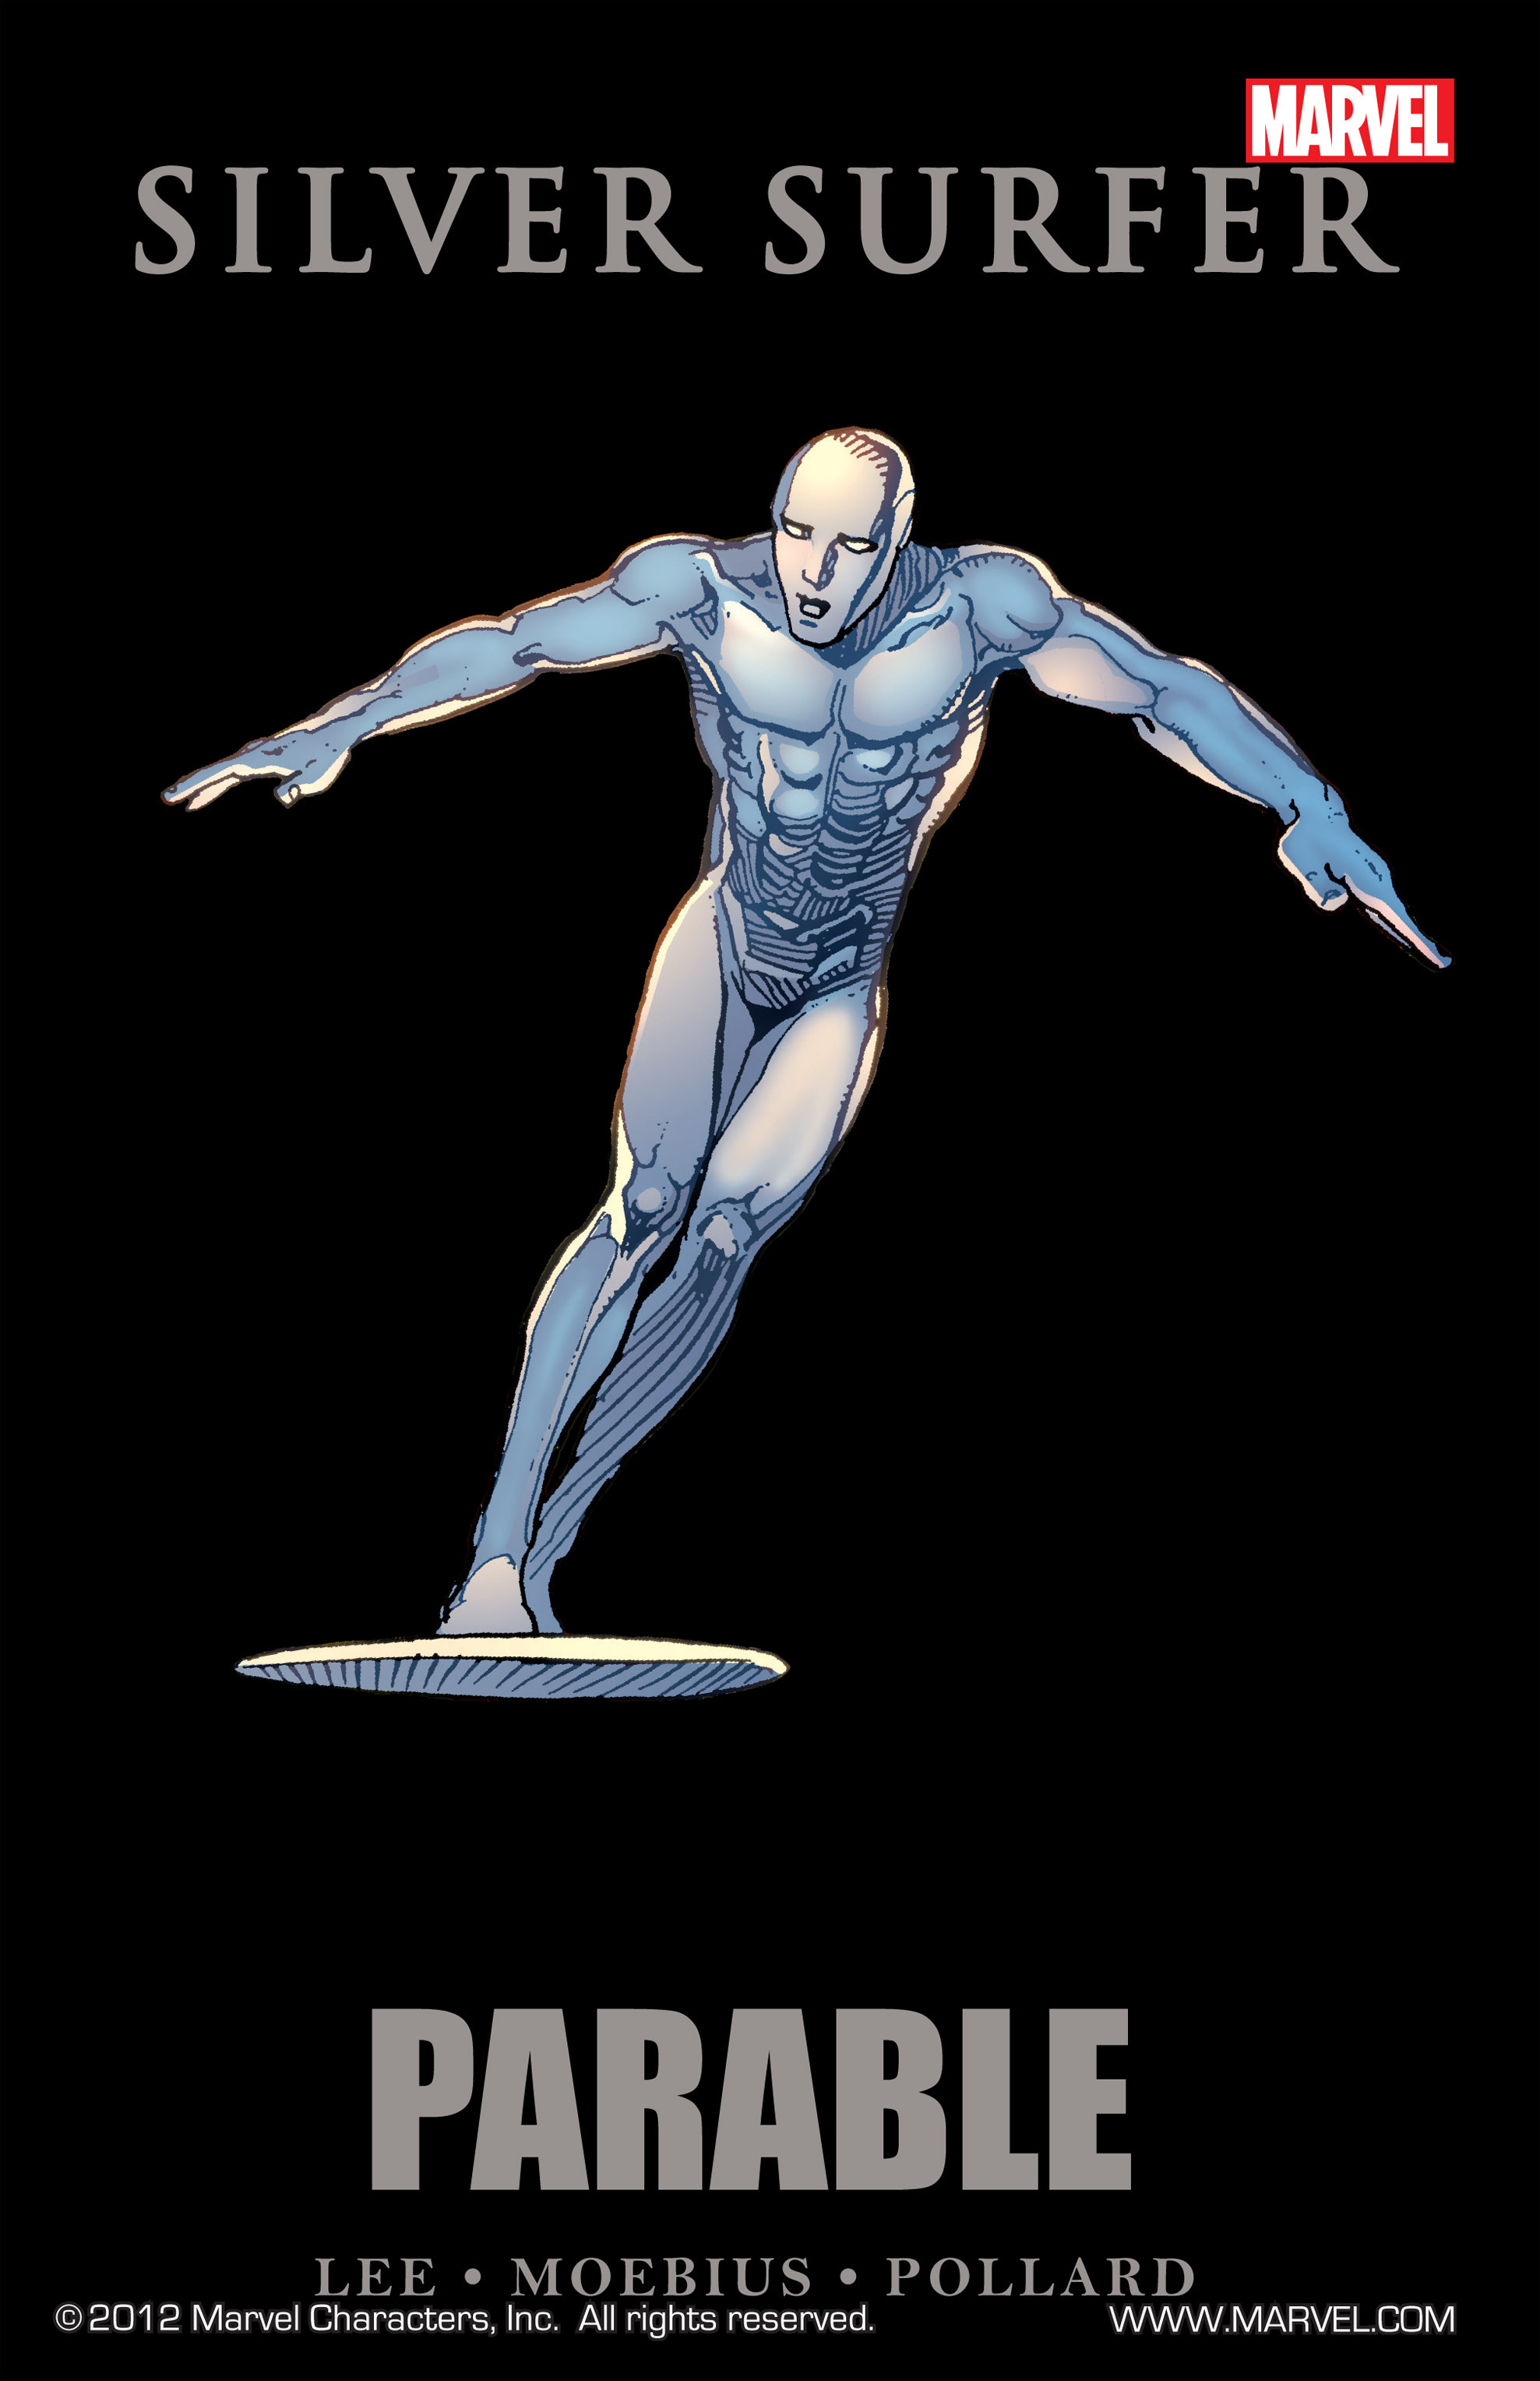 Read online Silver Surfer: Parable comic -  Issue # TPB - 1